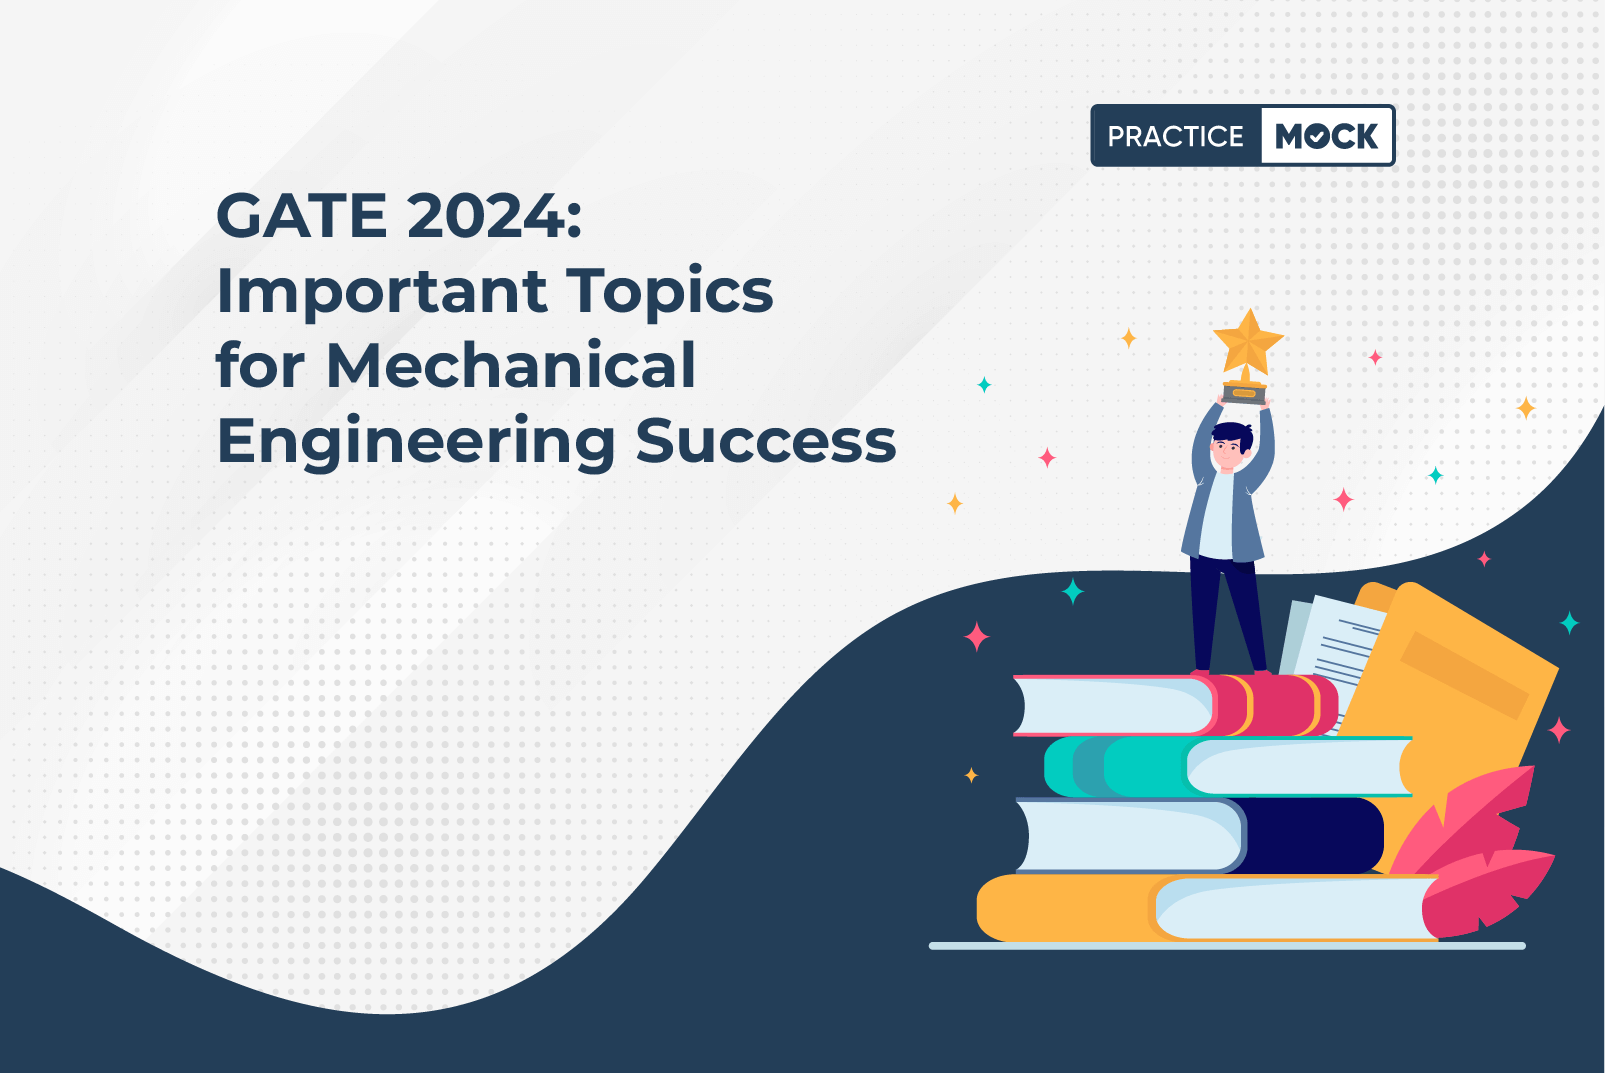 GATE 2024: Important Topics for Mechanical Engineering Success